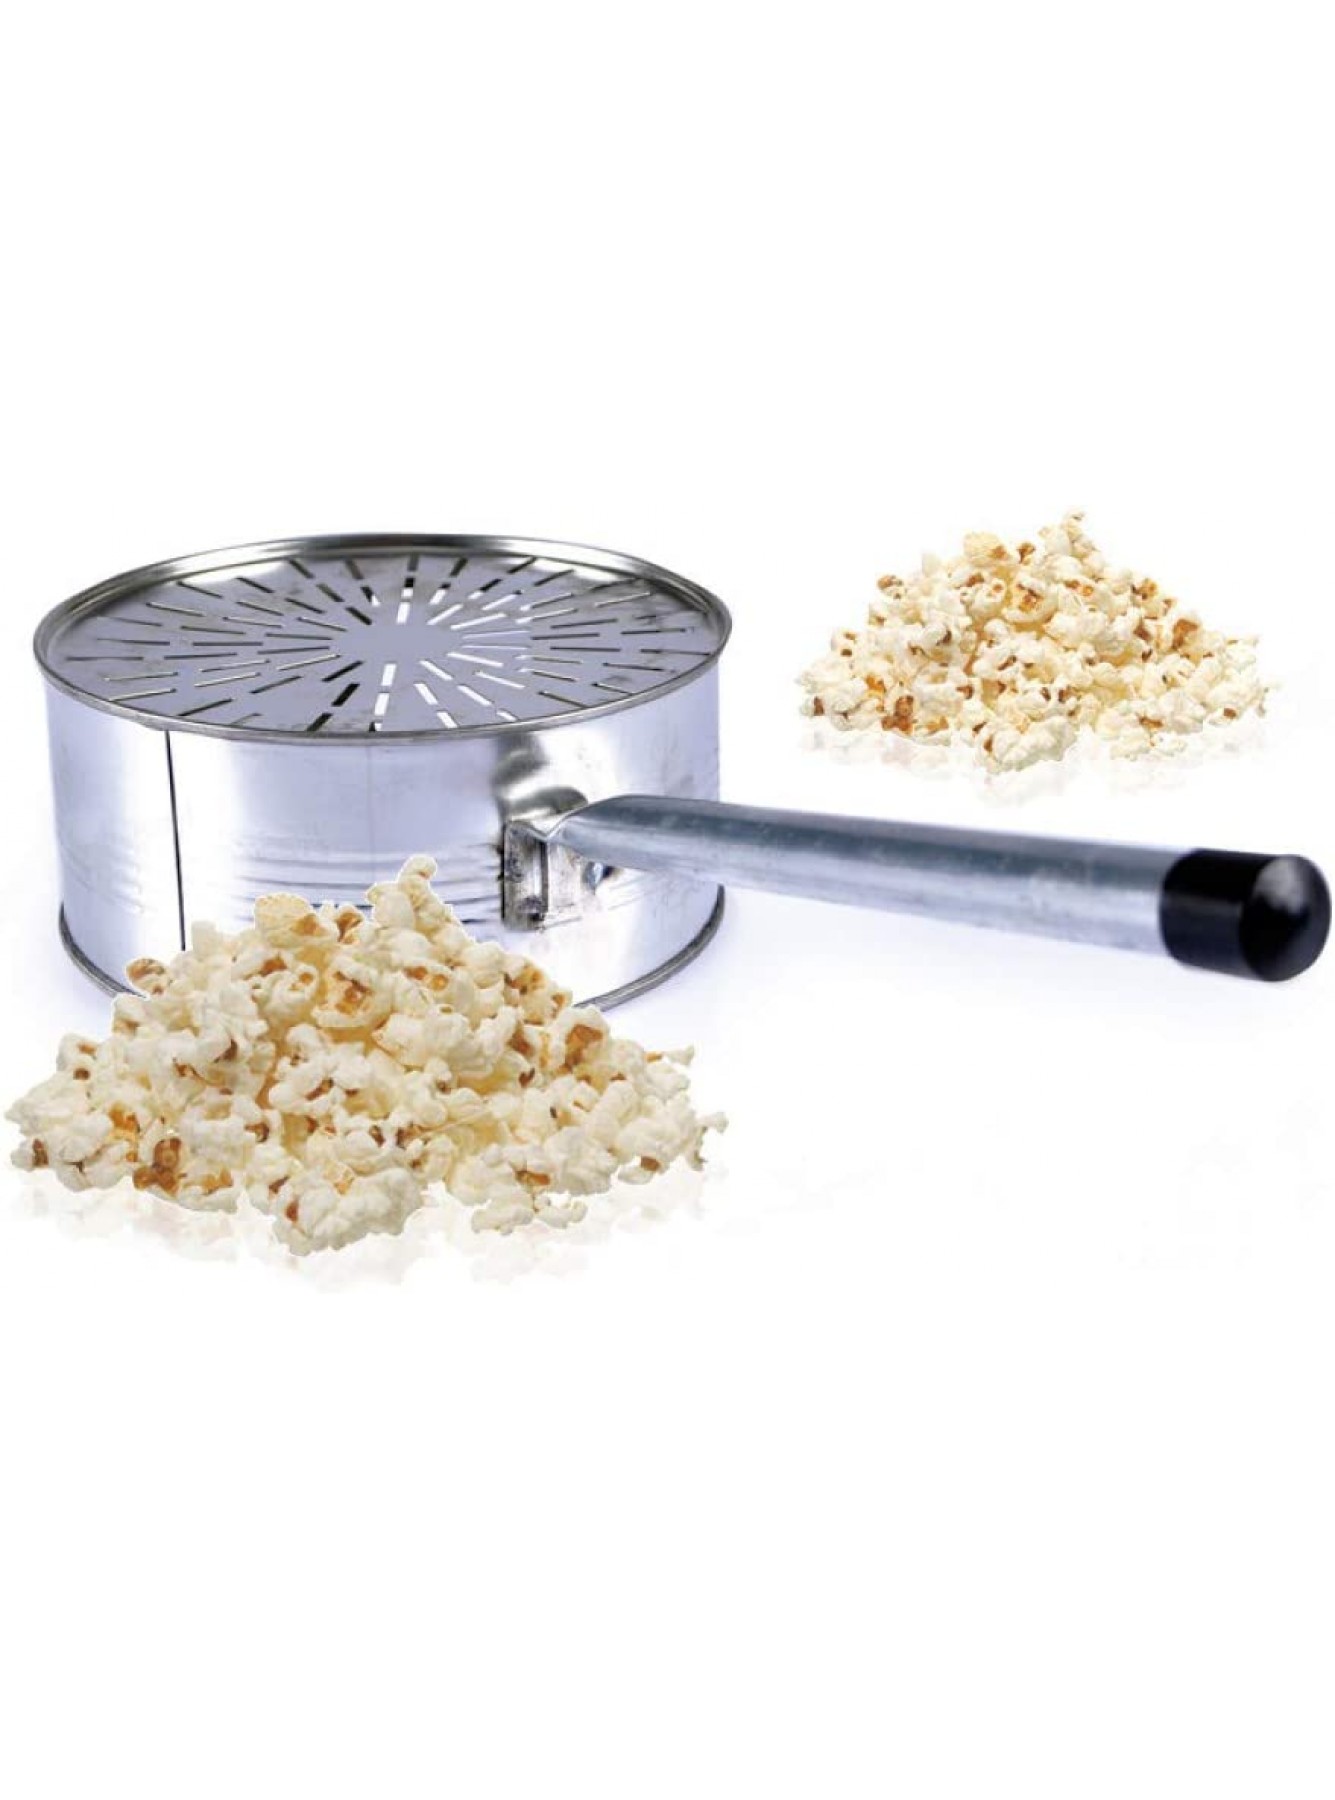 Popcorn Machine Popper Oil Free Popcorn Pan Practical Camp And Outdoor Makes Popcorn Just Like the Movies Splatter Guard for Cooking Stove Top Diameter 18cm B08TWQ7MJC